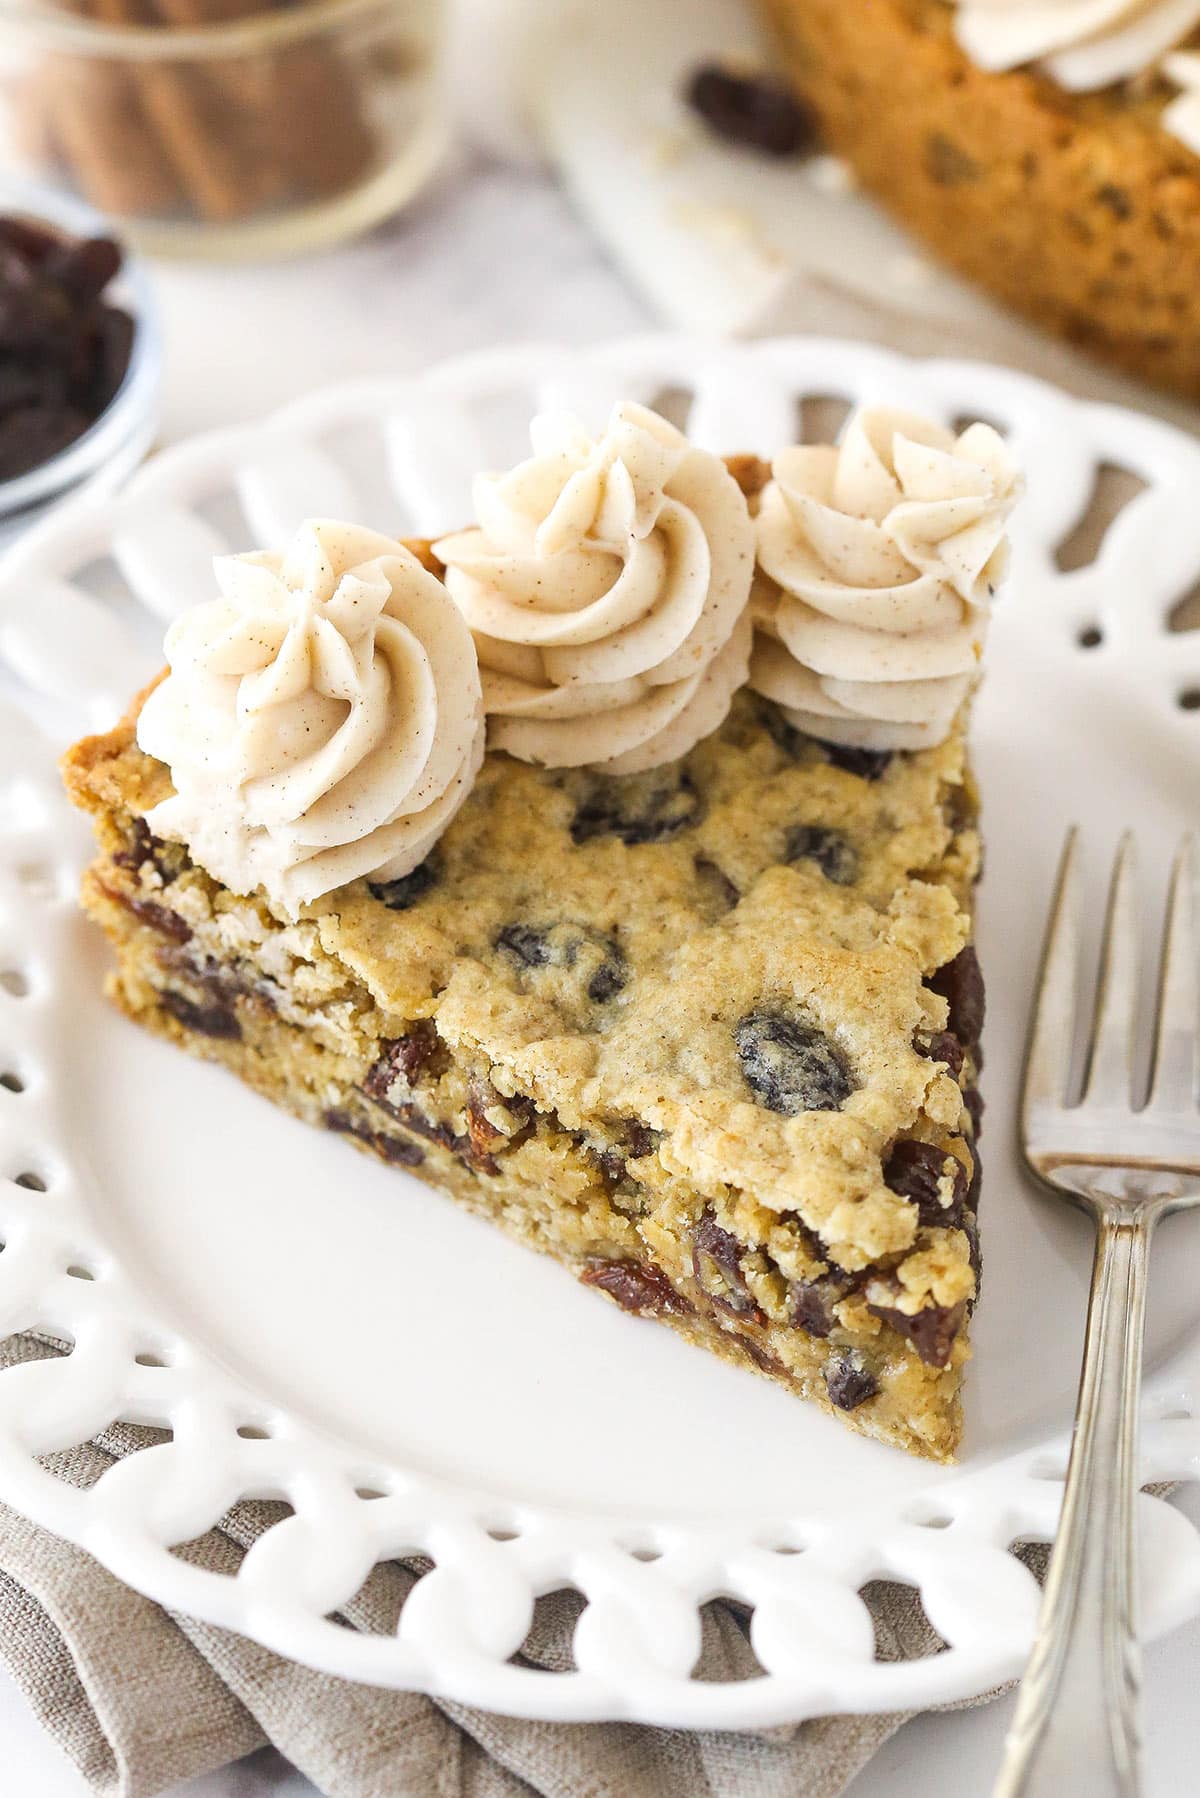 Overhead image of a slice of oatmeal raisin cookie cake on a plate with a fork.